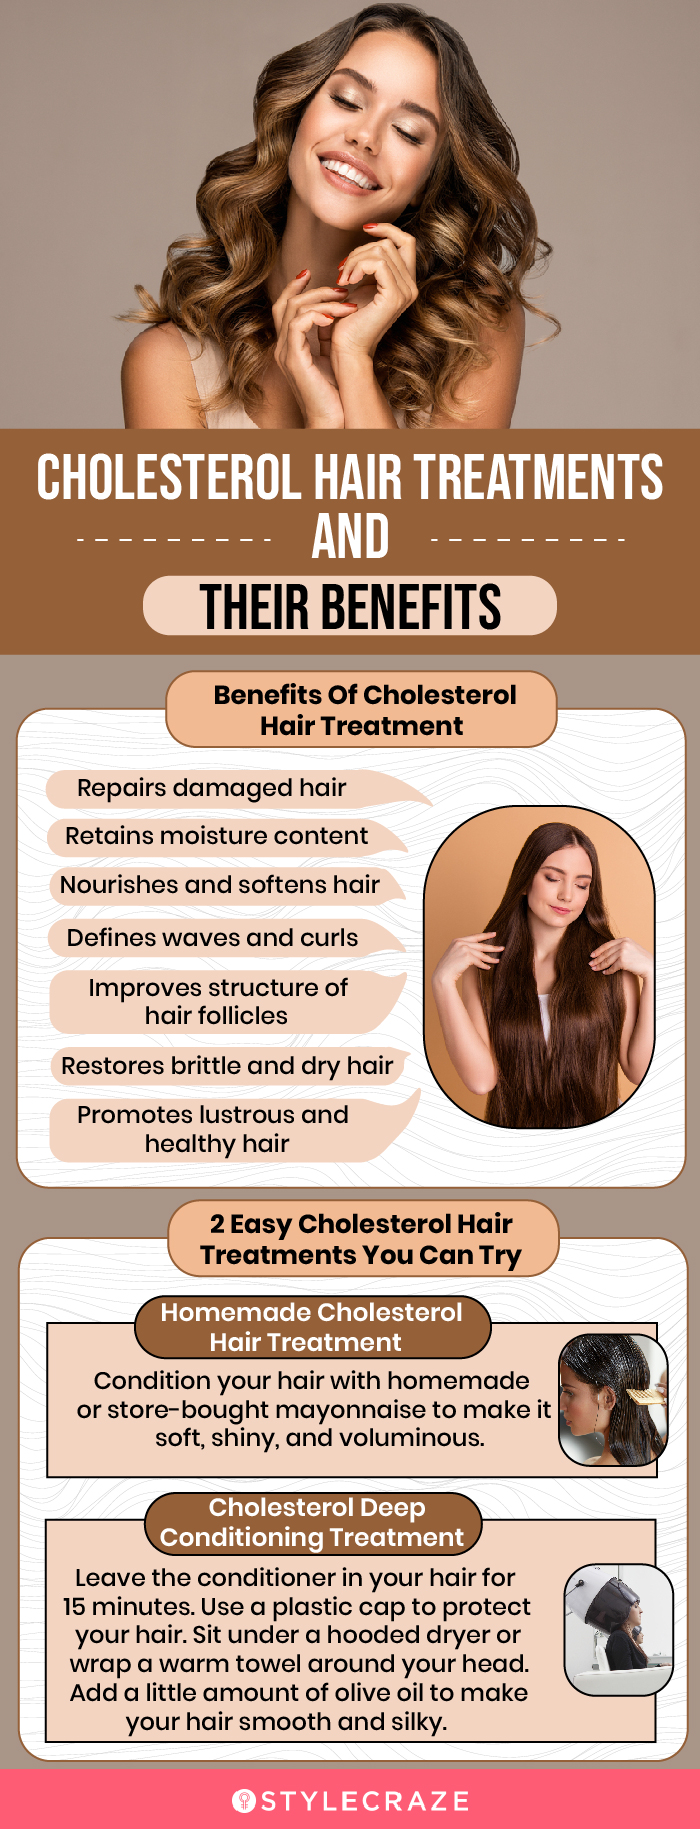 Cholesterol Hair Treatment – What Is It And What Are Its Benefits?